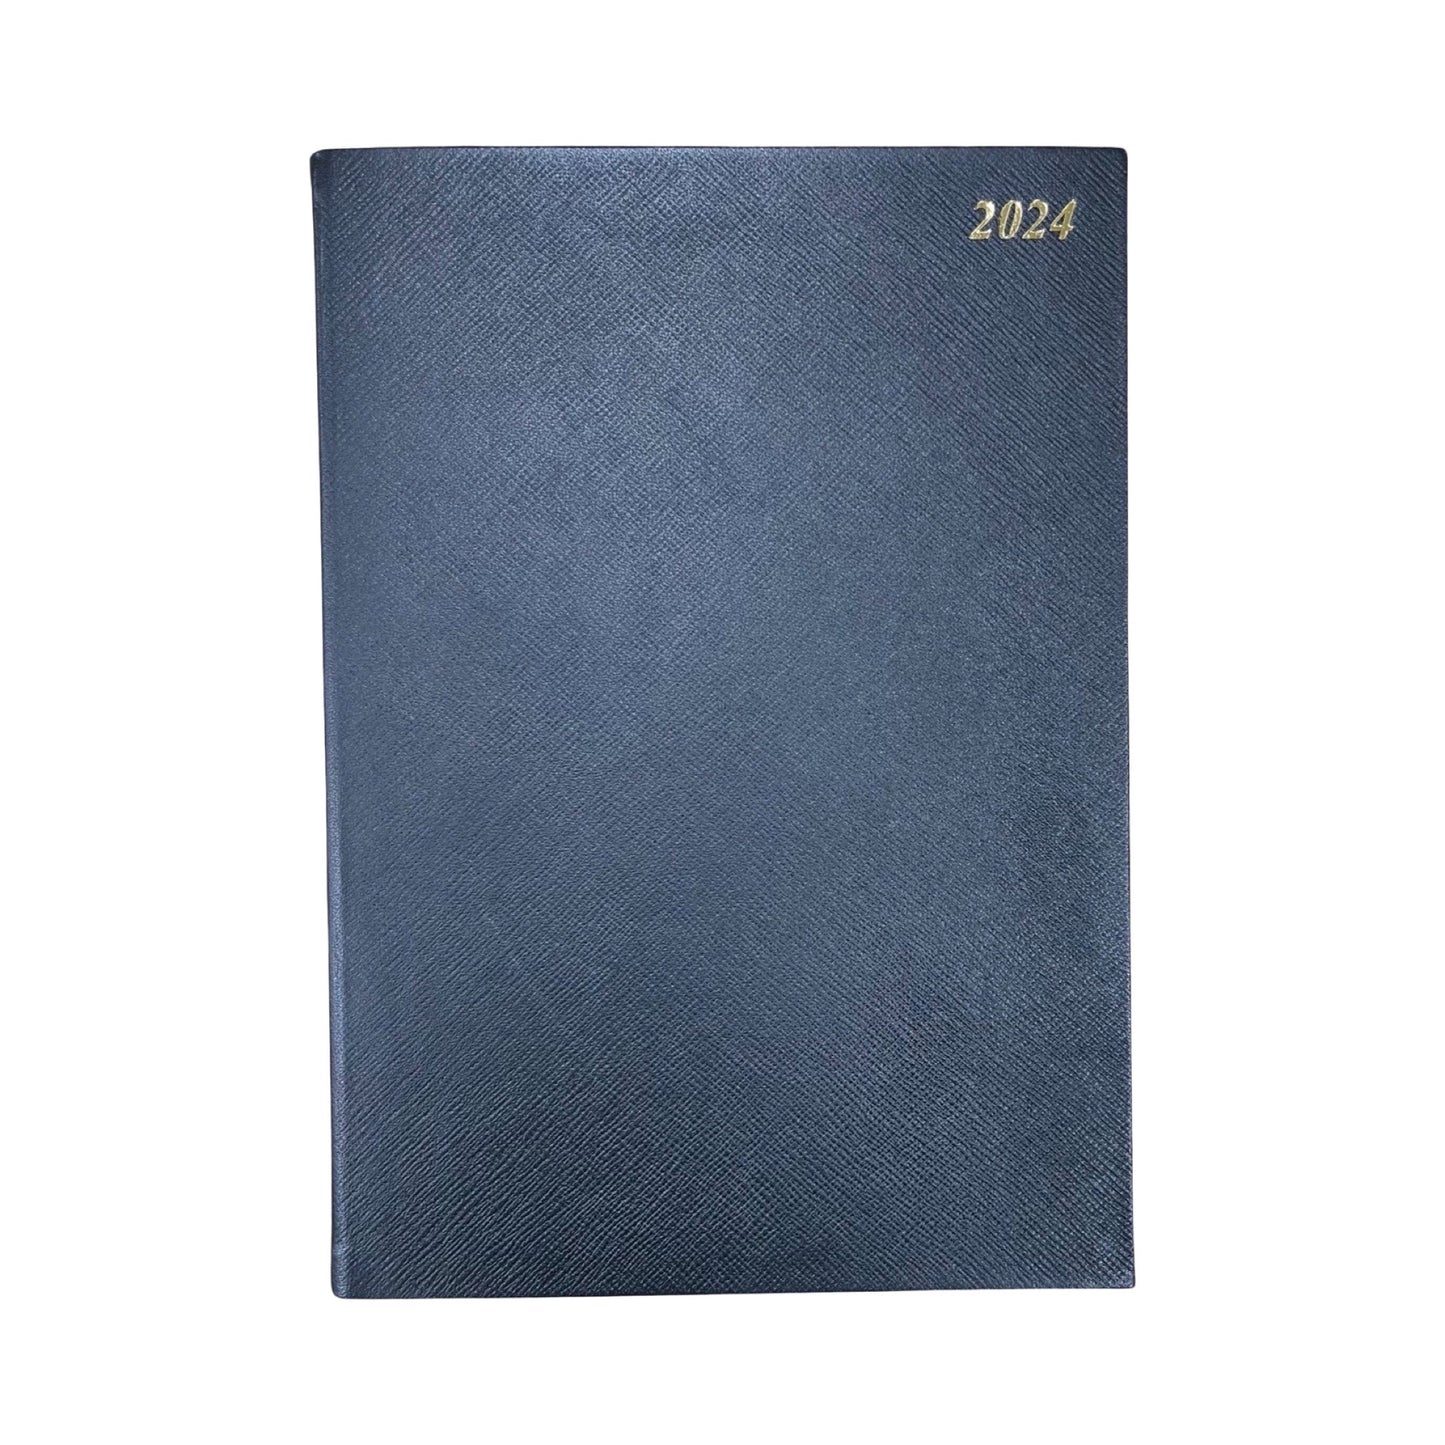 2024 Desk Agenda | New! Extra Large! | CROSSGRAIN LEATHER APPOINTMENT DESK PLANNER | A4 Size | 8.5 x 12" | One Day Per Page | D1A4L